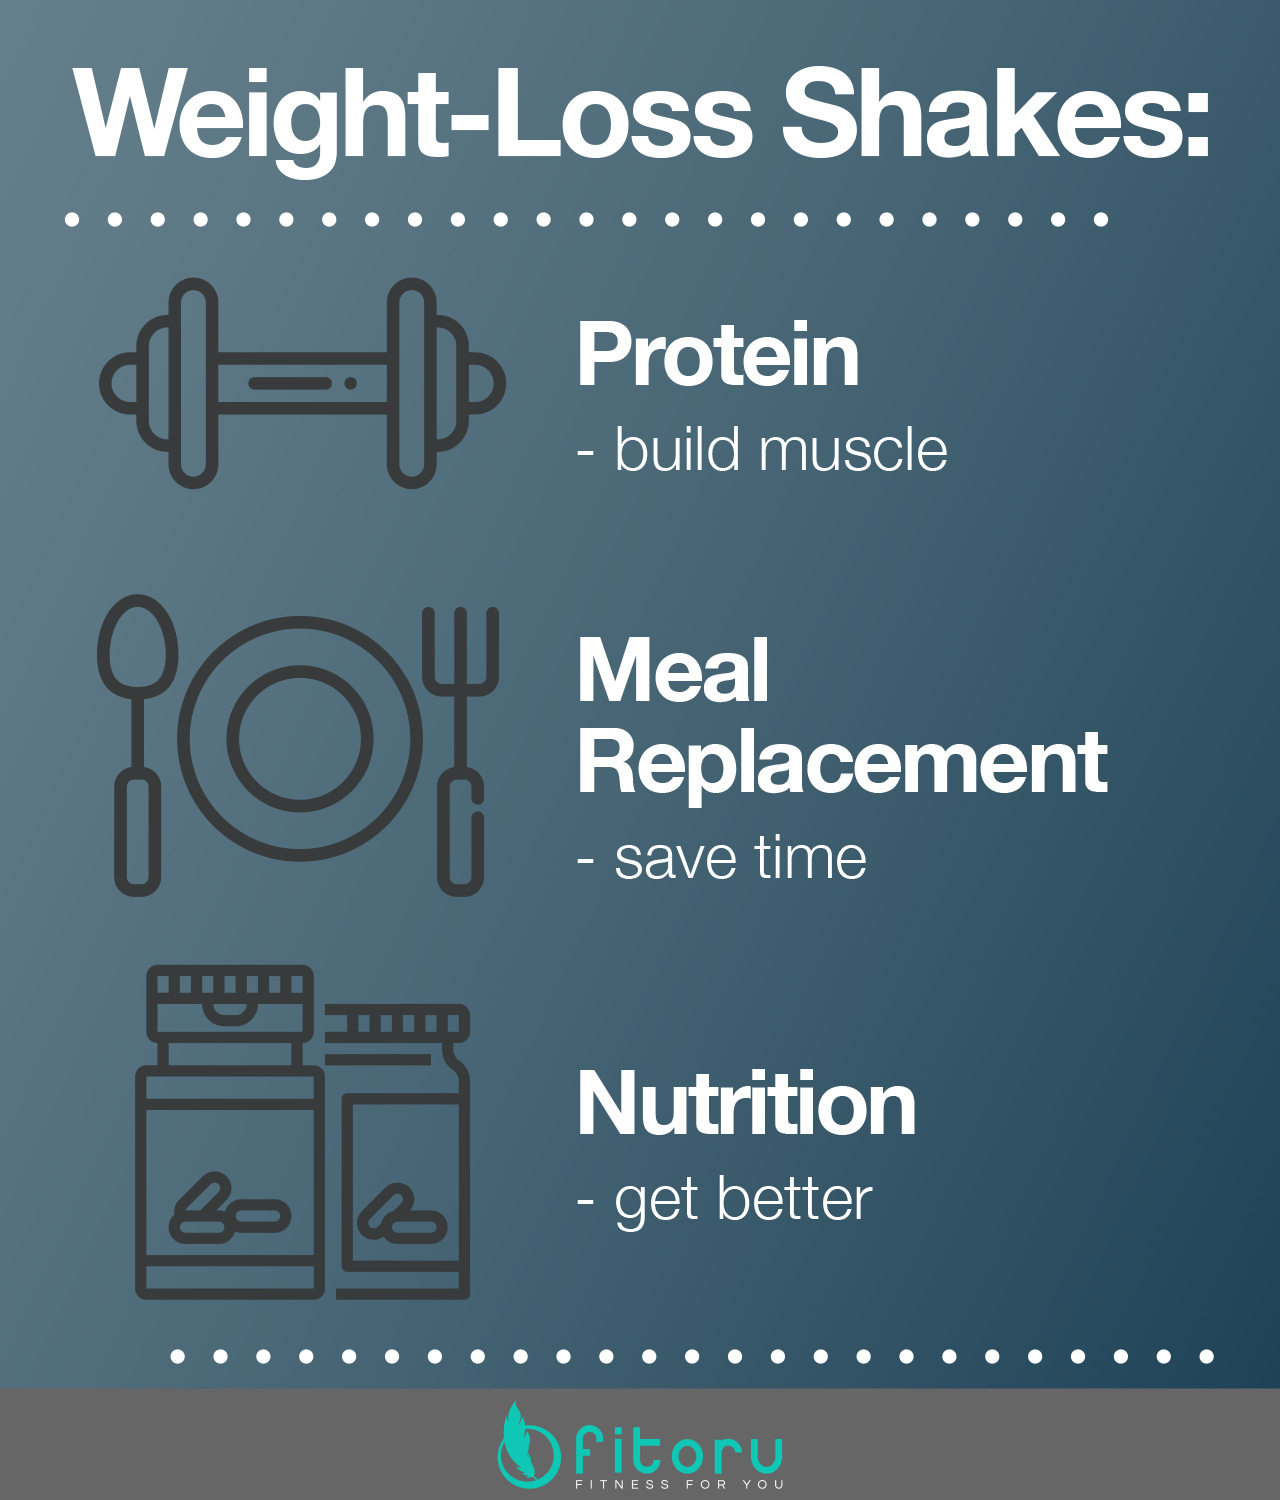 Weight-loss shakes to fit your needs.